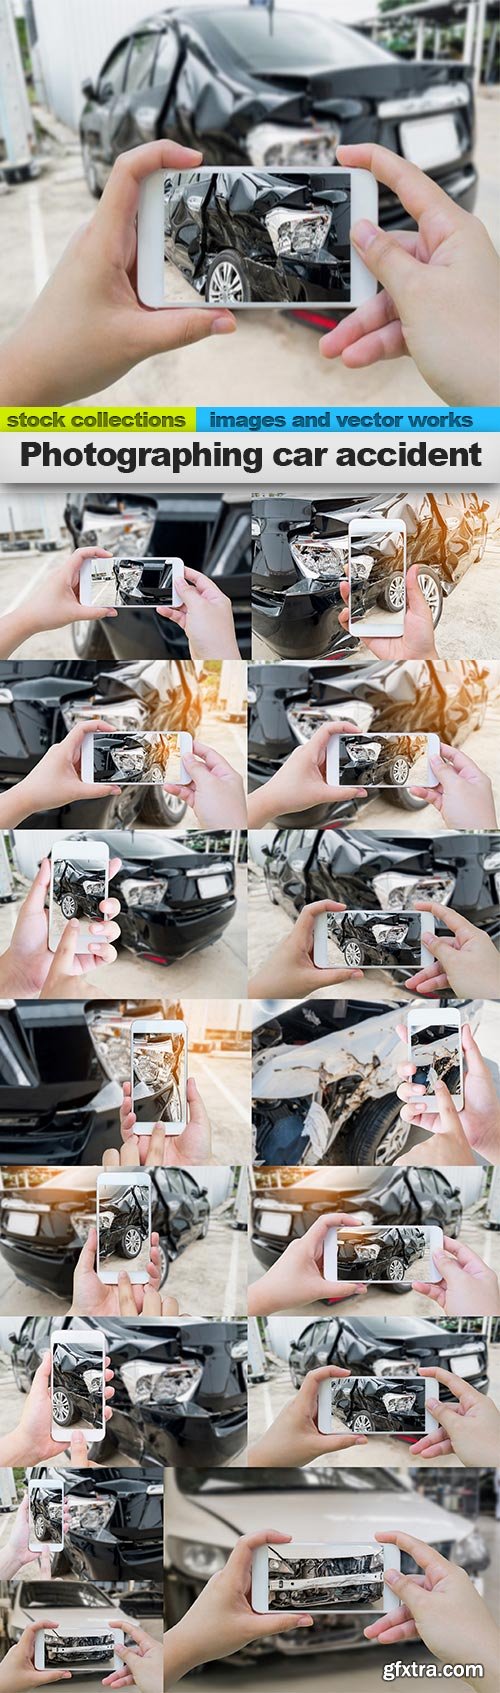 Photographing car accident, 15 x UHQ JPEG